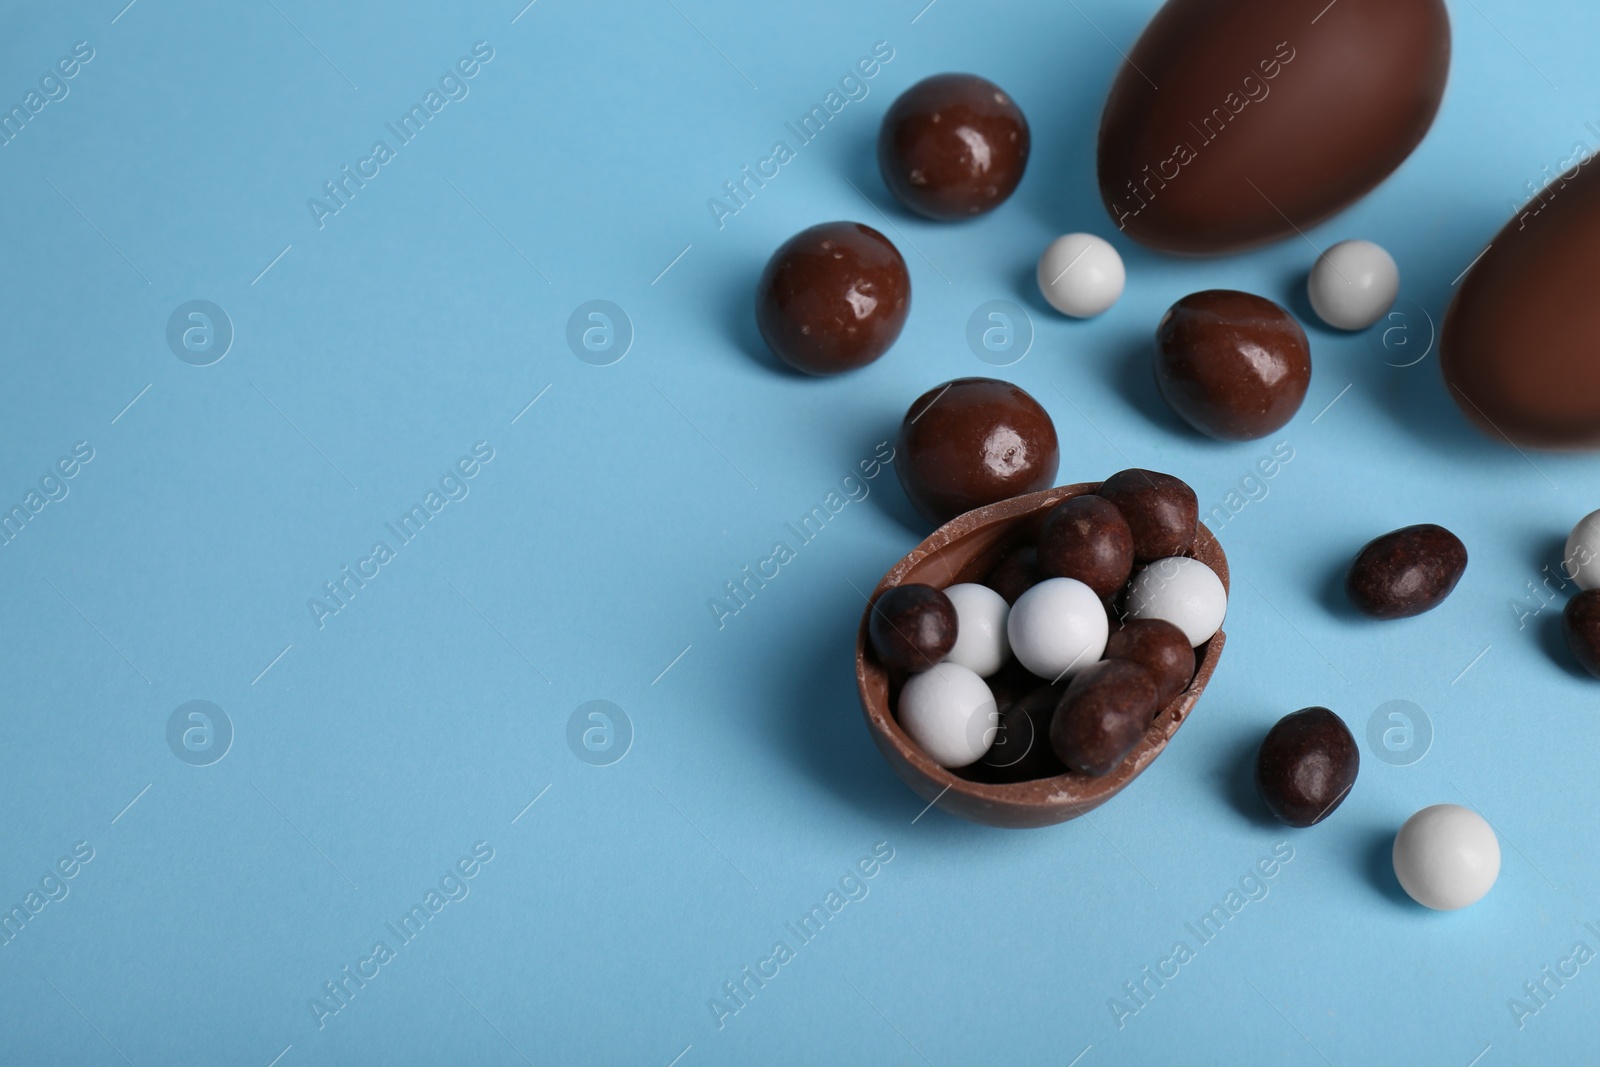 Photo of Tasty chocolate eggs and different sweets on light blue background, above view. Space for text